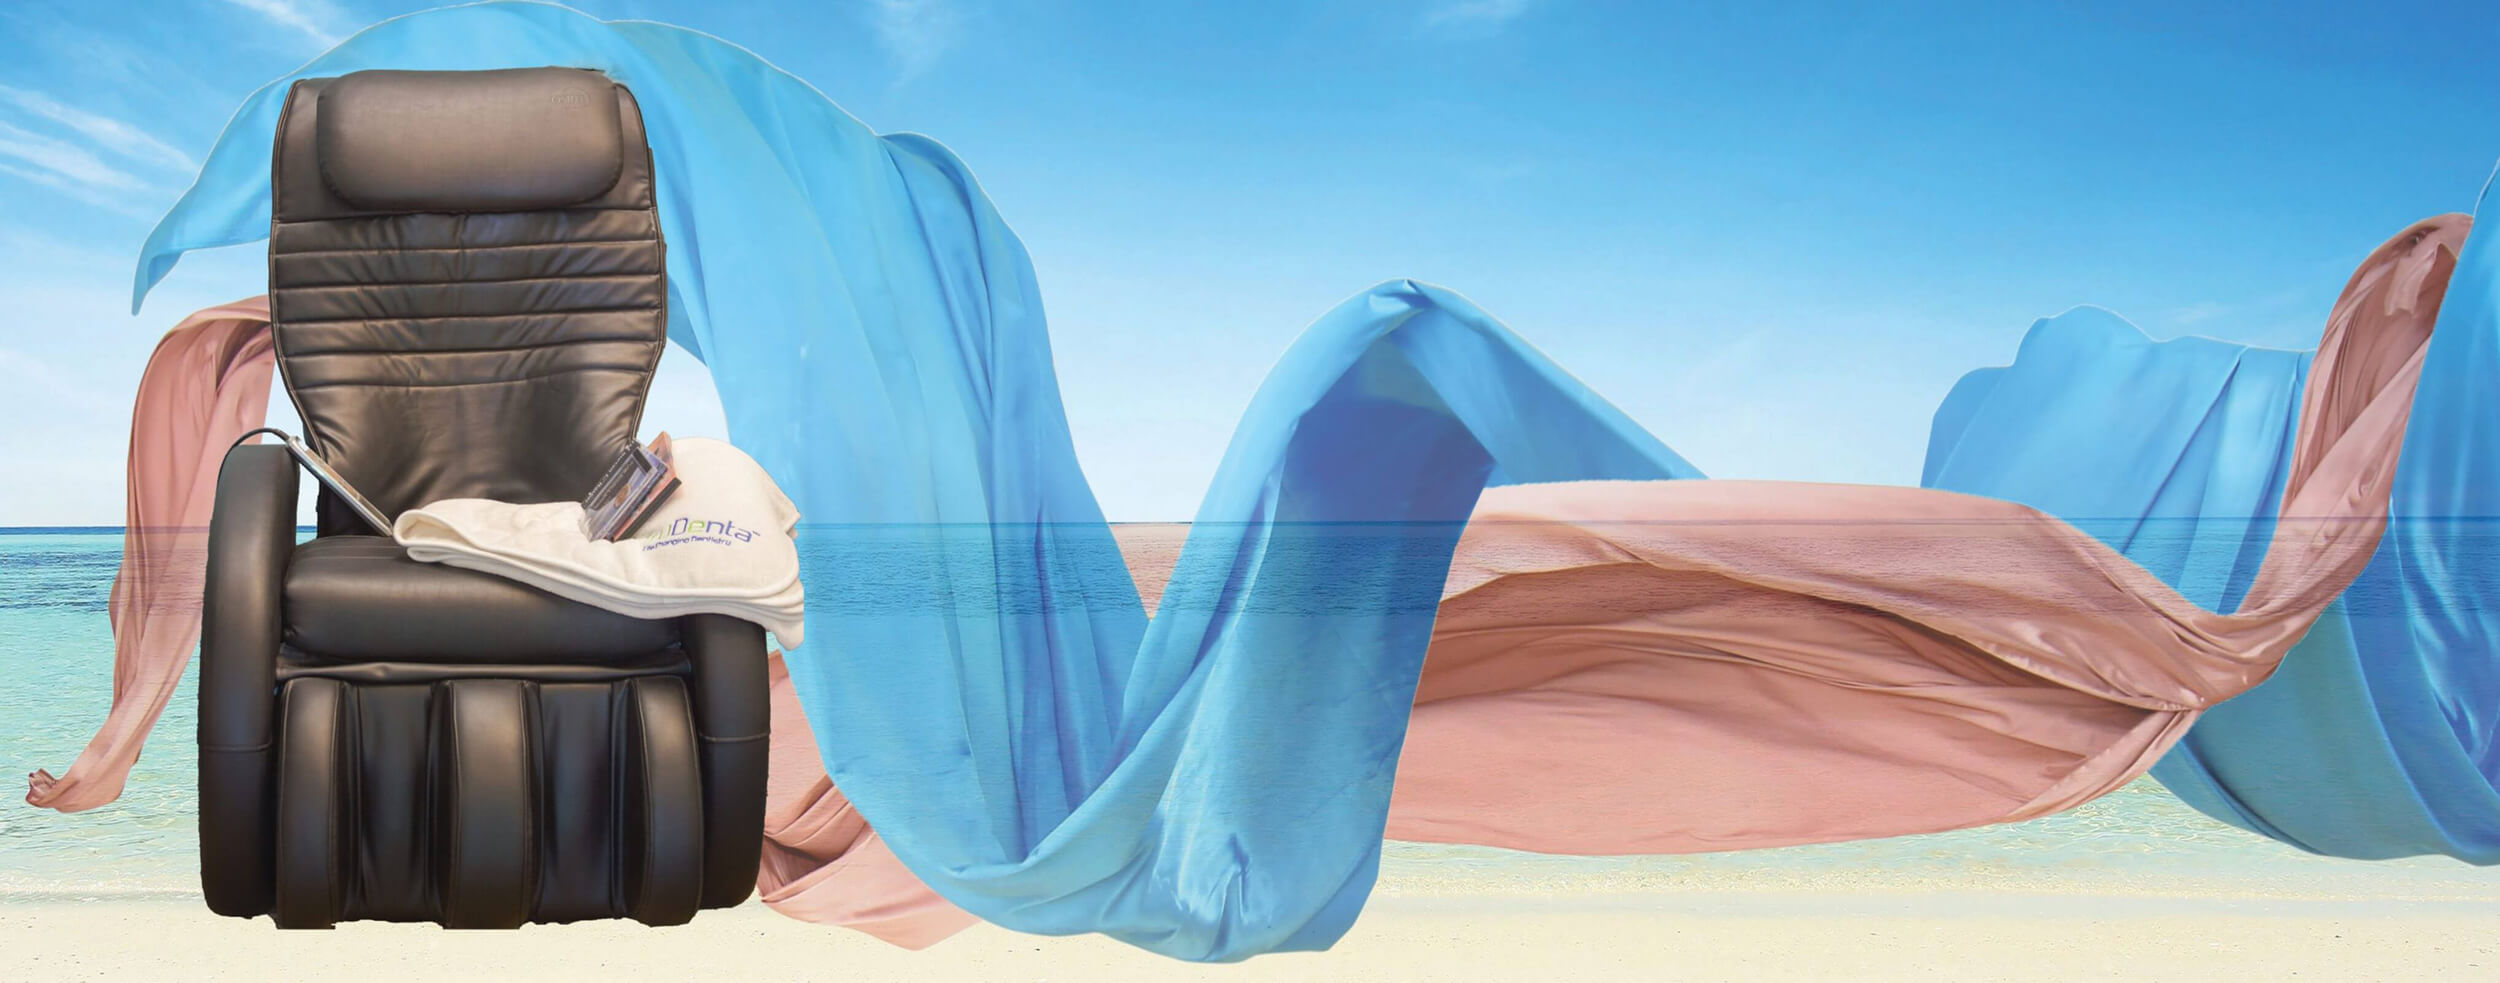 brand image for NCCDE showing dental chair on the beach with scarves